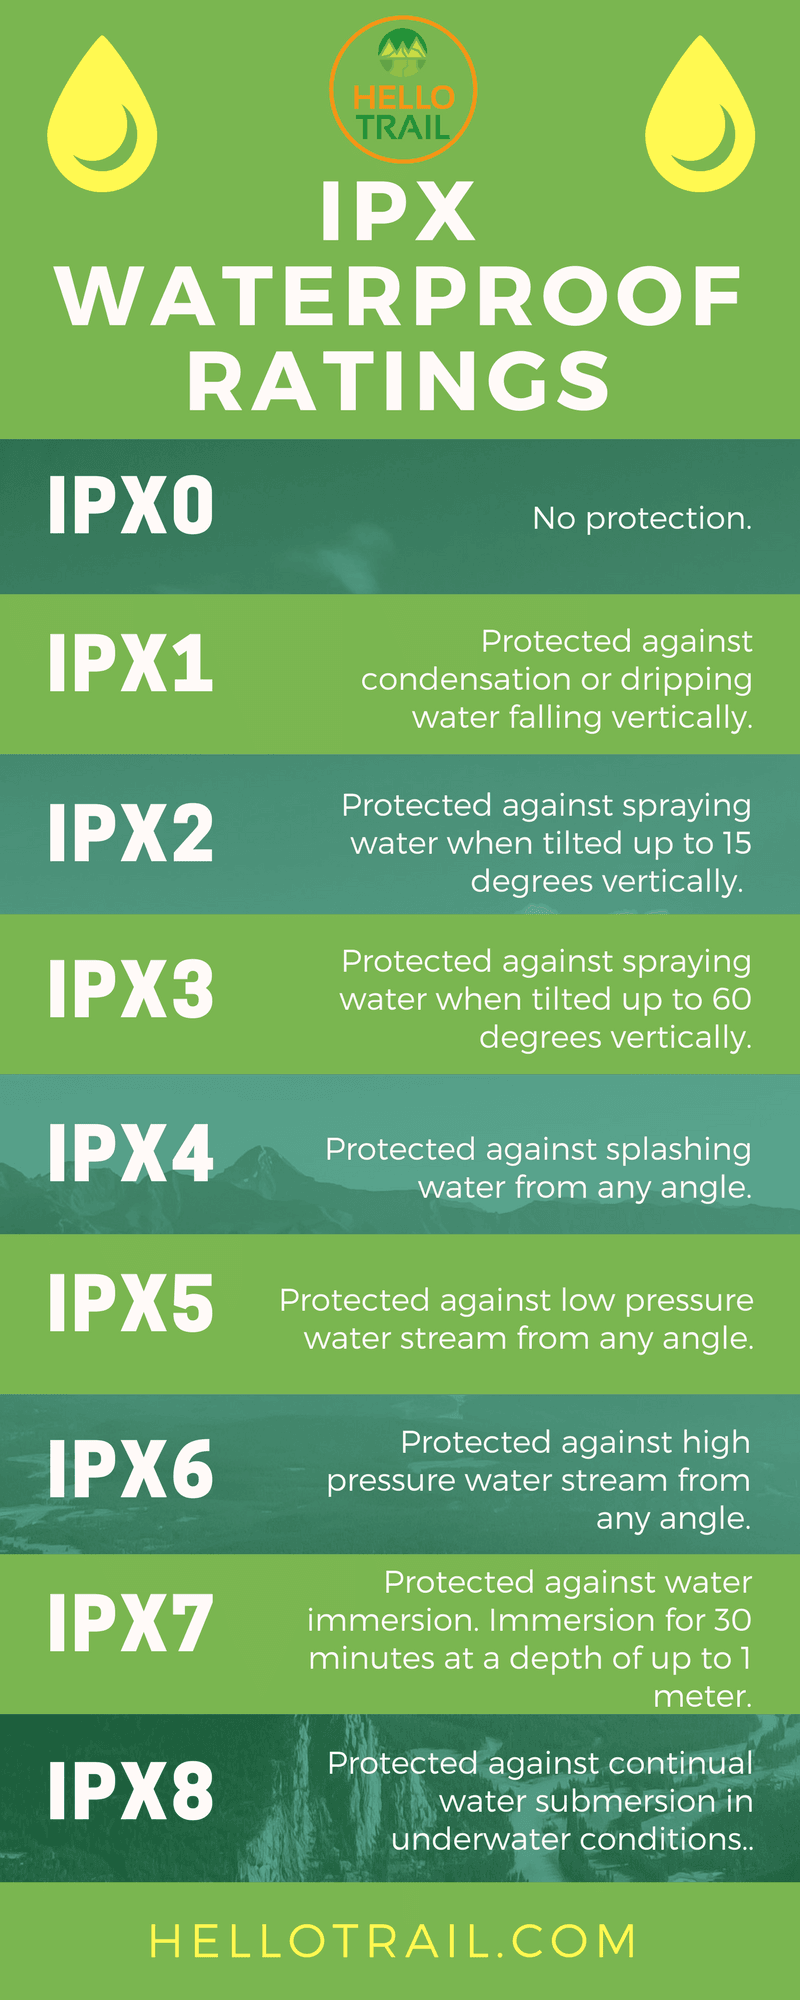 Learn the differences between IPX waterproof ratings - IPX0 to IPX8